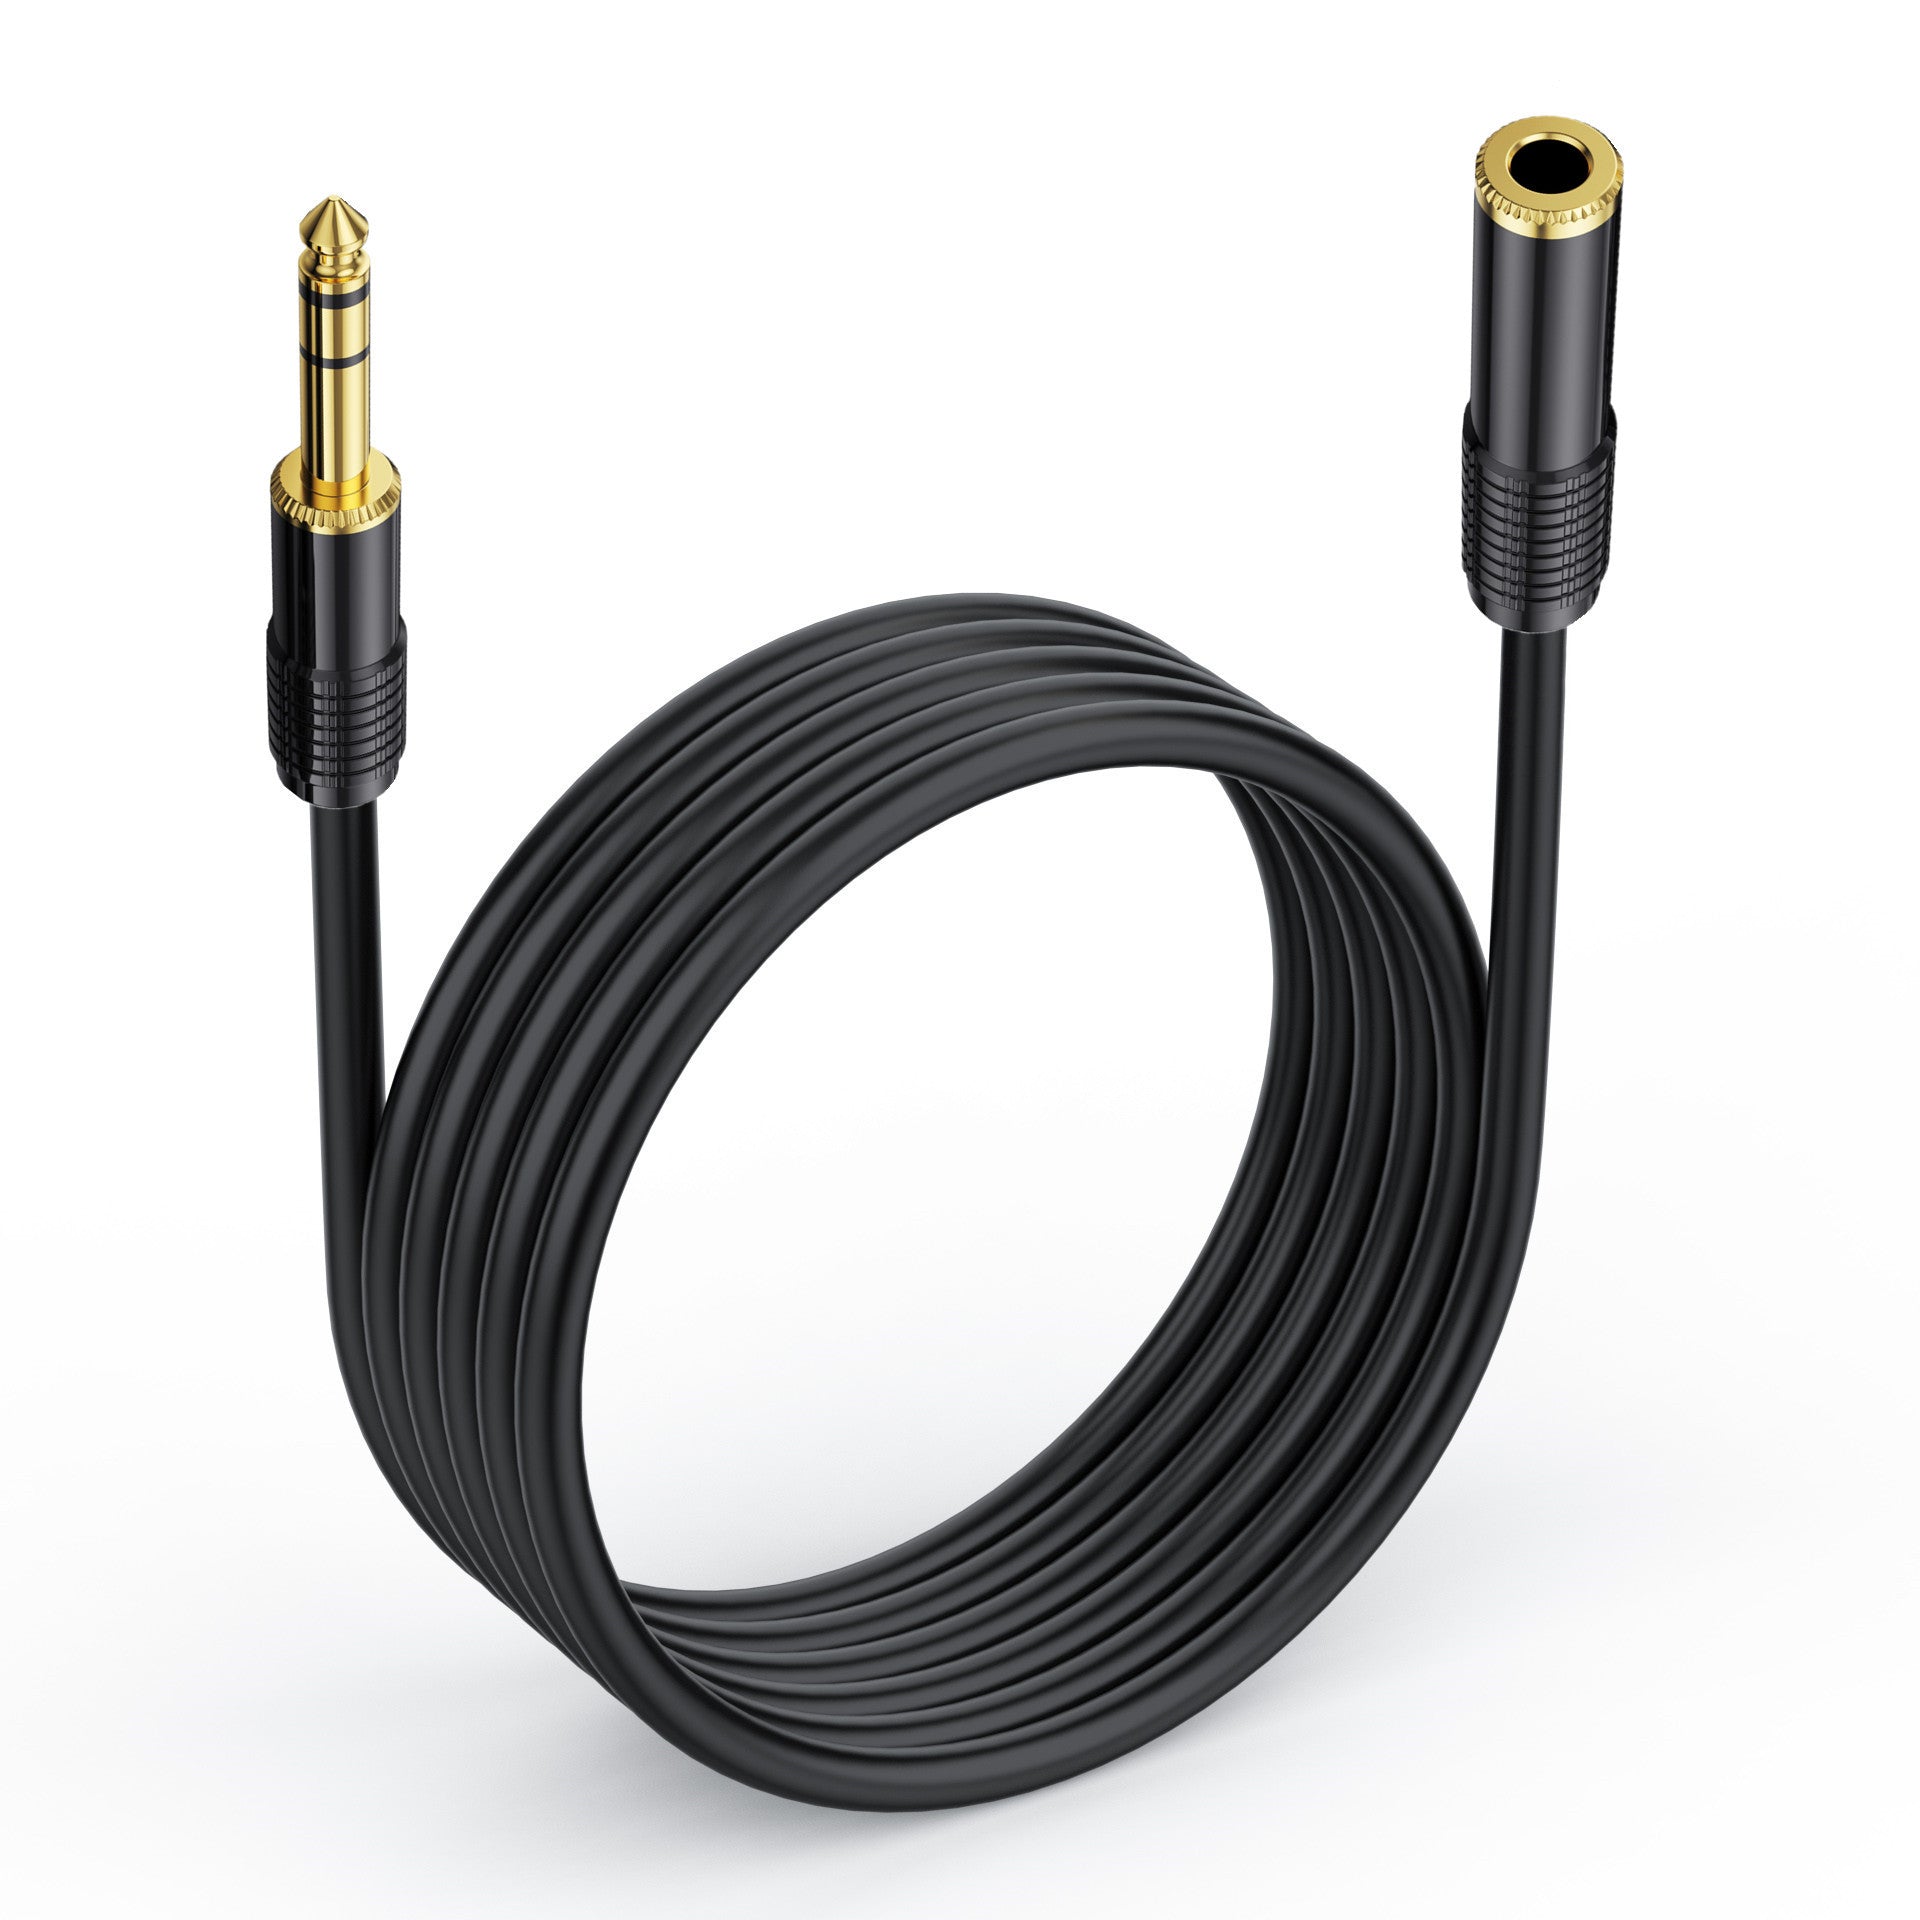 6.35mm 1/4 inch TRS Stereo Male to Female Balanced Audio Extension Cable